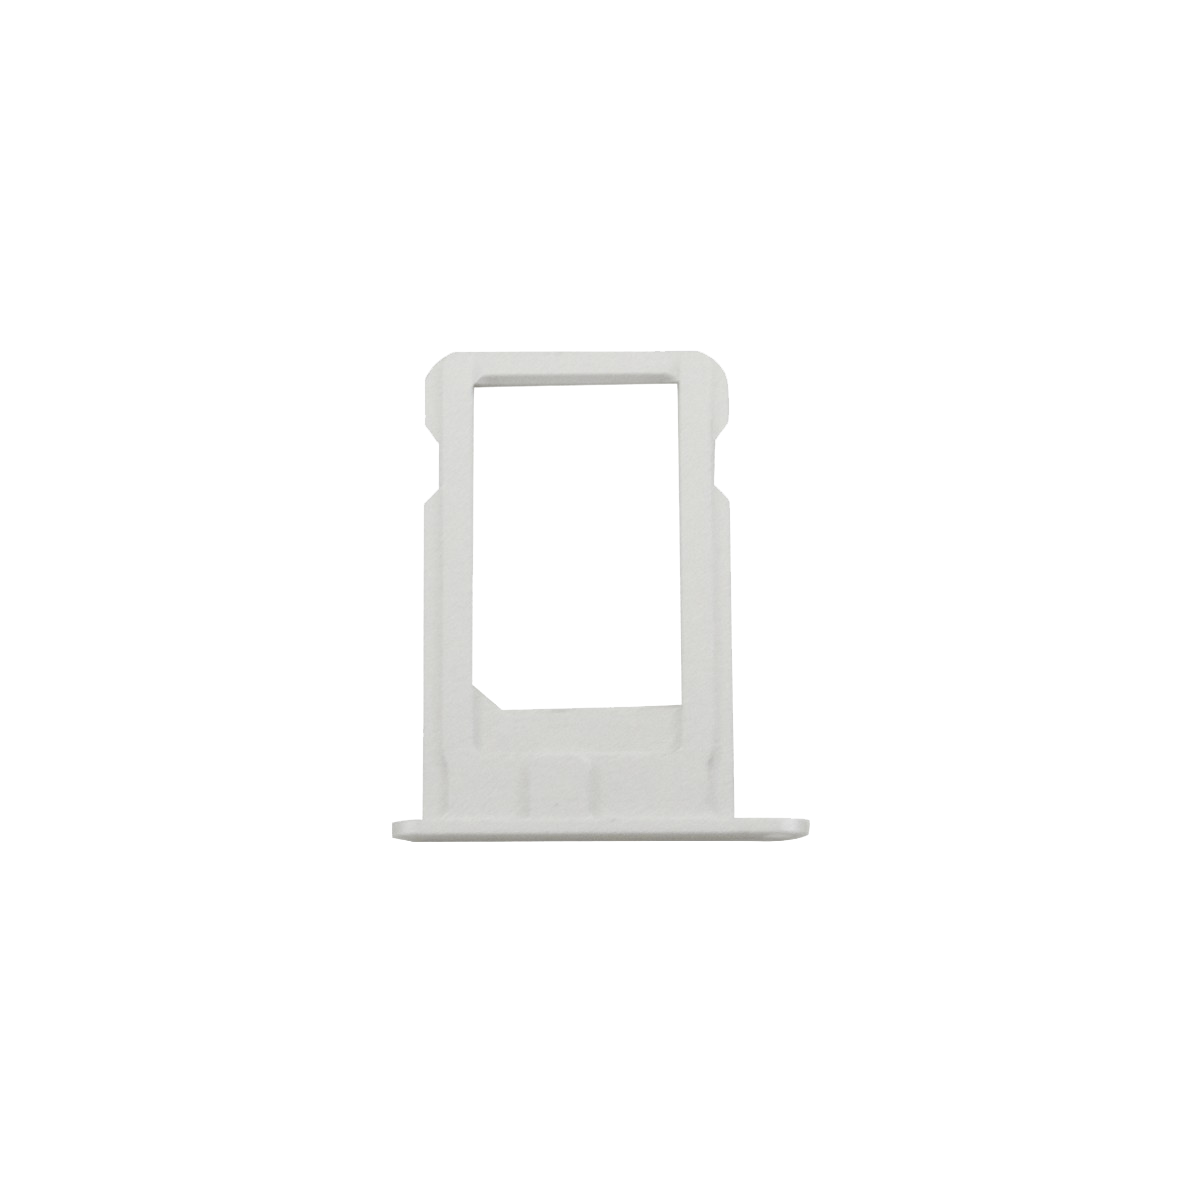 iPhone 5 SIM Card Tray Replacement